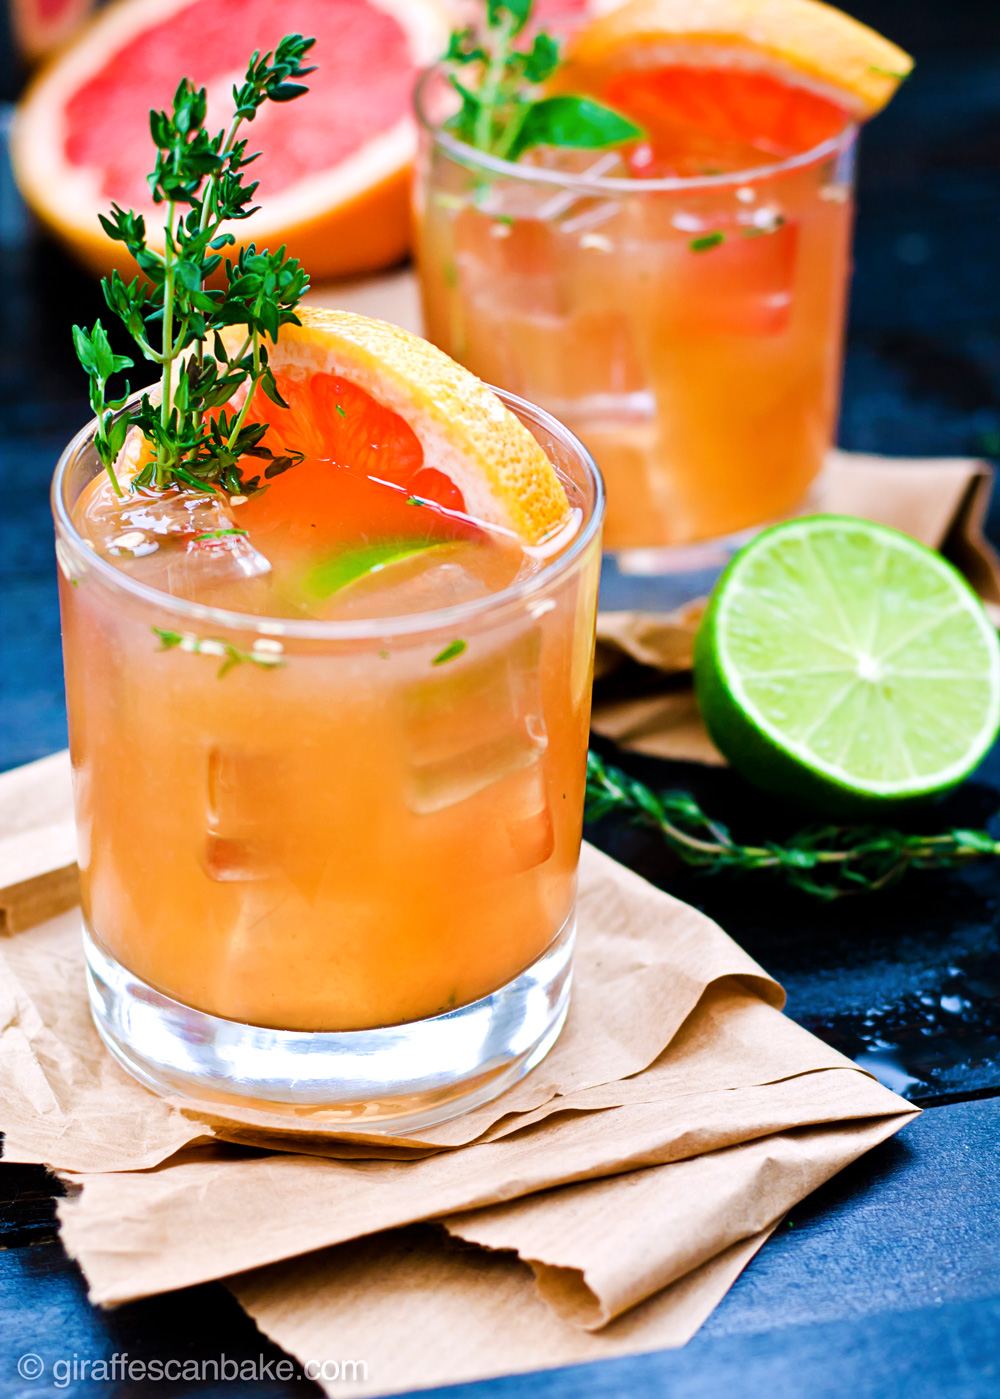 This Grapefruit and Thyme Bourbon Smash is full of bright citrus flavour and aromatic herbs, showcasing the best of winter seasonal fruit. Muddled lime and thyme, combined with fresh grapefruit juice and delicious bourbon, it’s the perfect way to get the most out of those amazing grapefruits. This cocktail is refreshing, full of flavour and totally gorgeous – it’s the perfect cocktail to serve at any occasion.